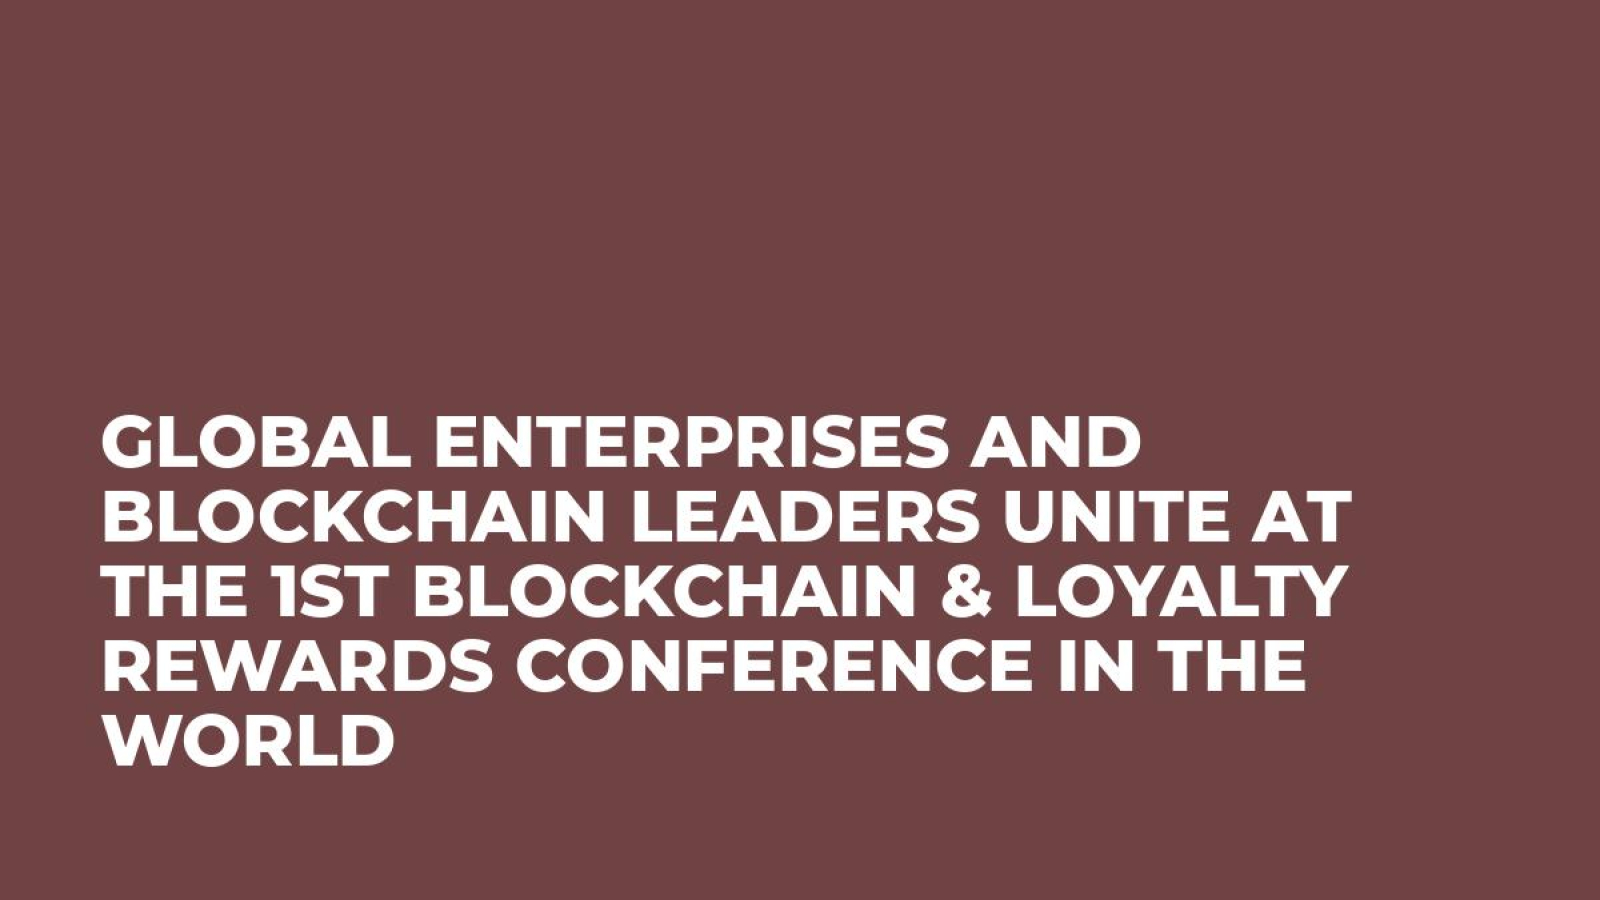 Global enterprises and blockchain leaders unite at the 1st Blockchain & Loyalty Rewards Conference in the World